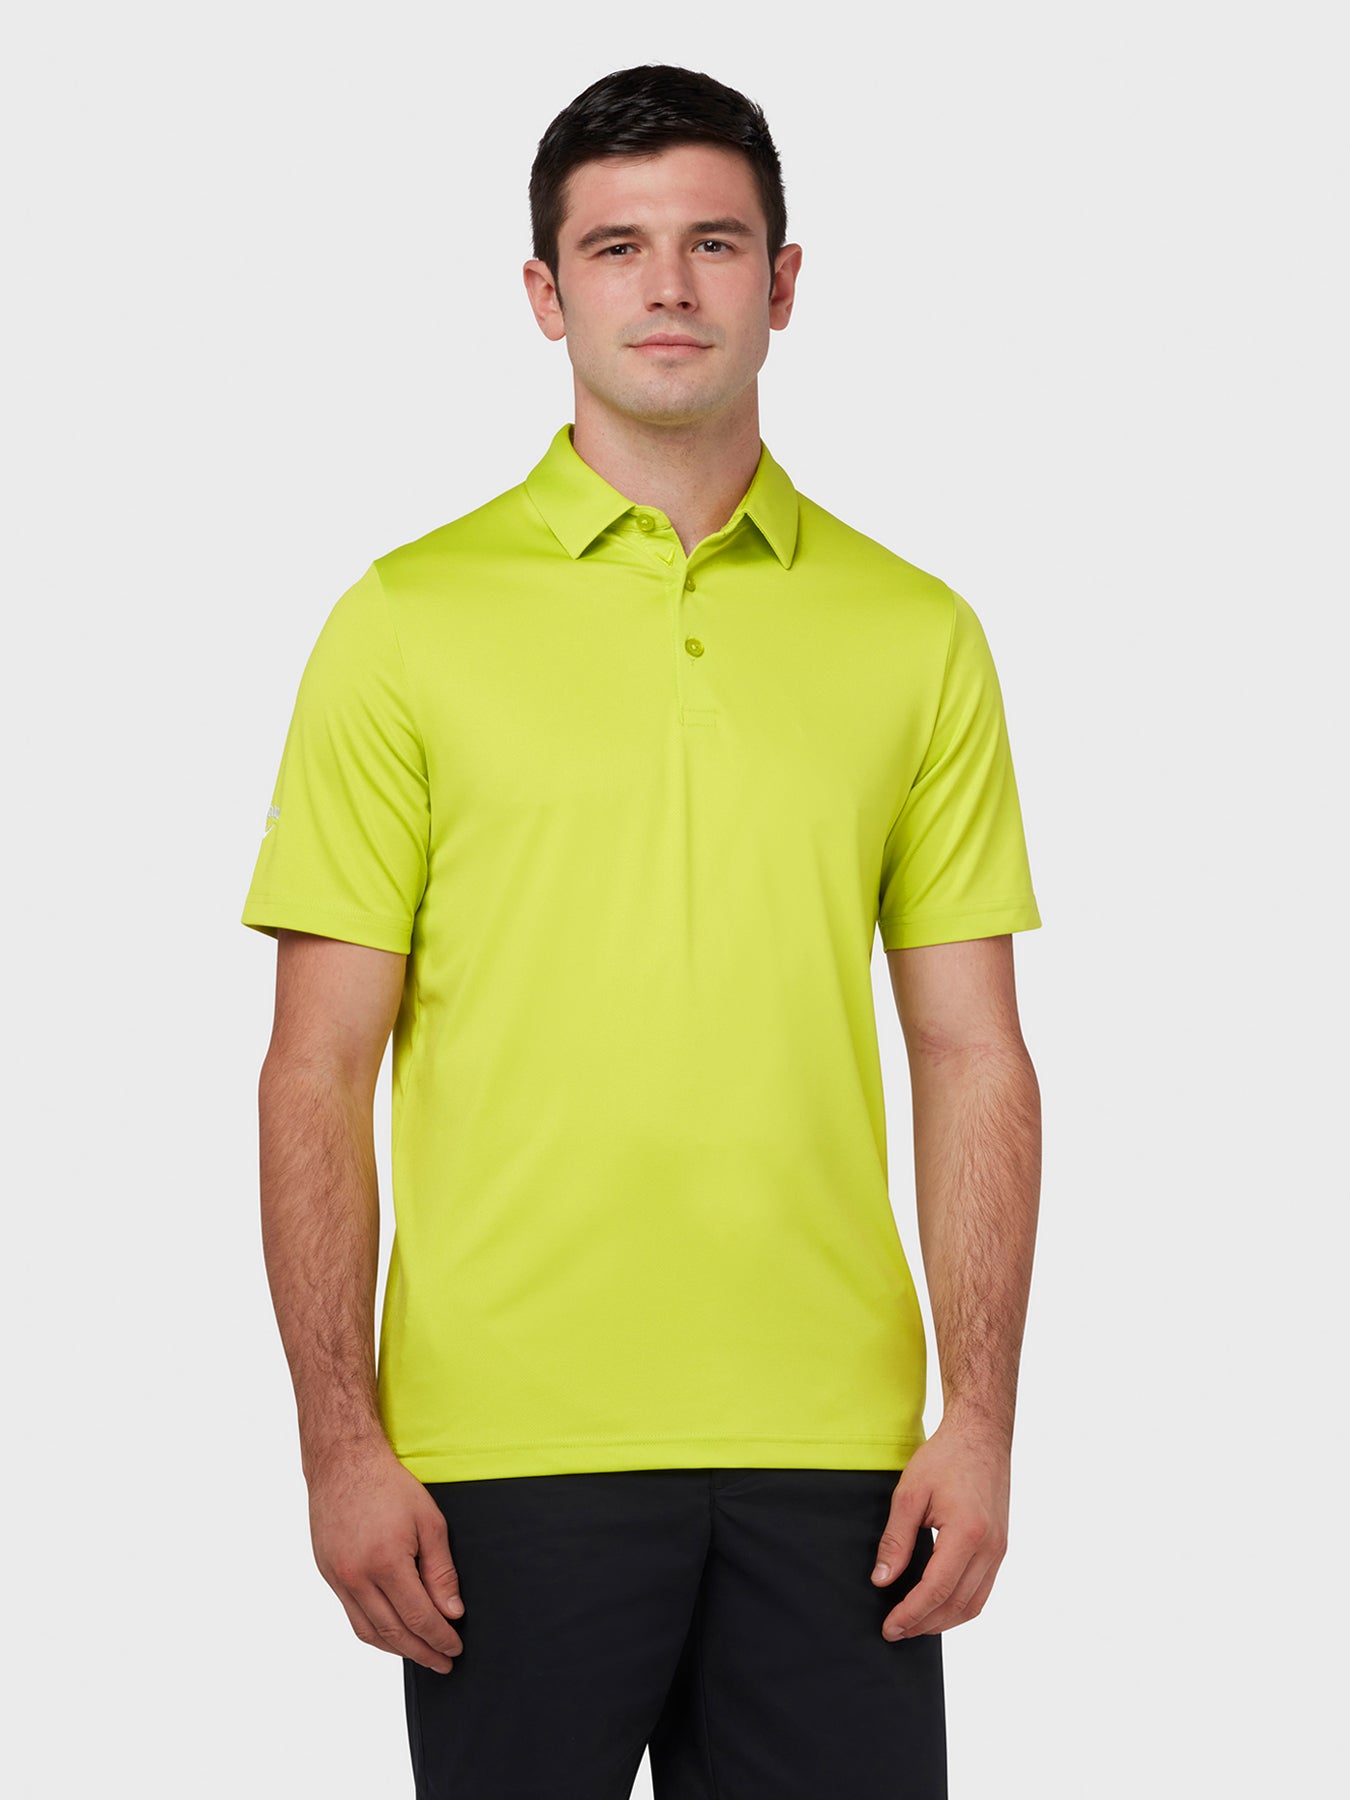 View Swing Tech Tour Polo In Surreal Green Surreal Green XXXL information